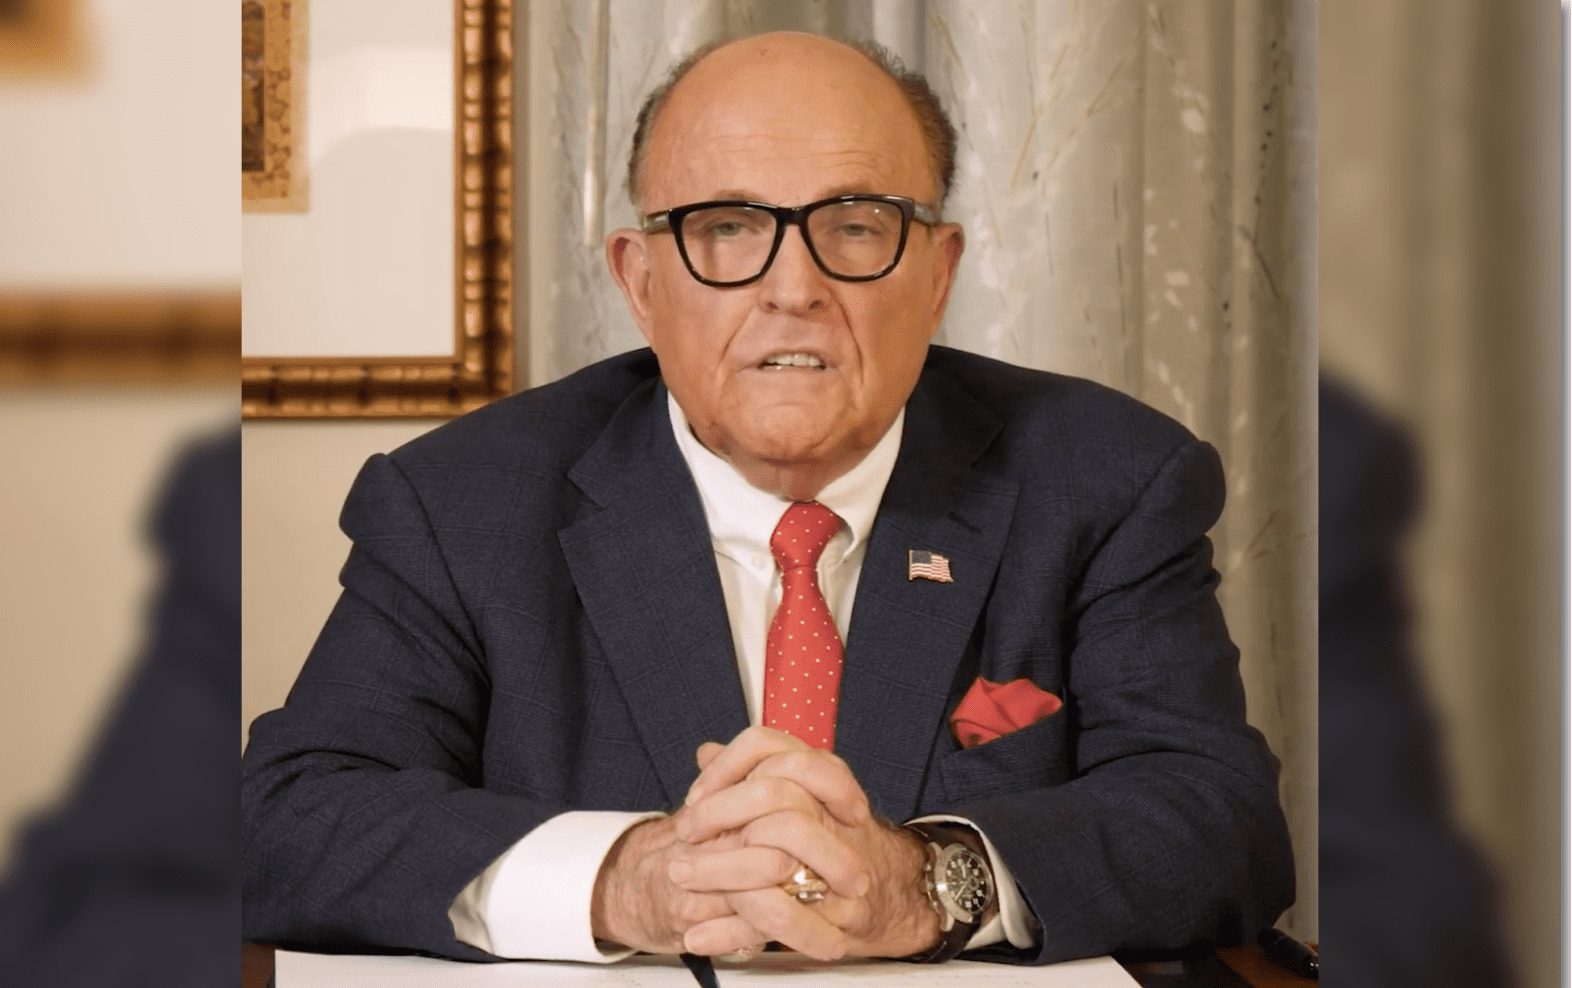 Rudy Giuliani Blasts Mitch McConnell In His Latest Interview